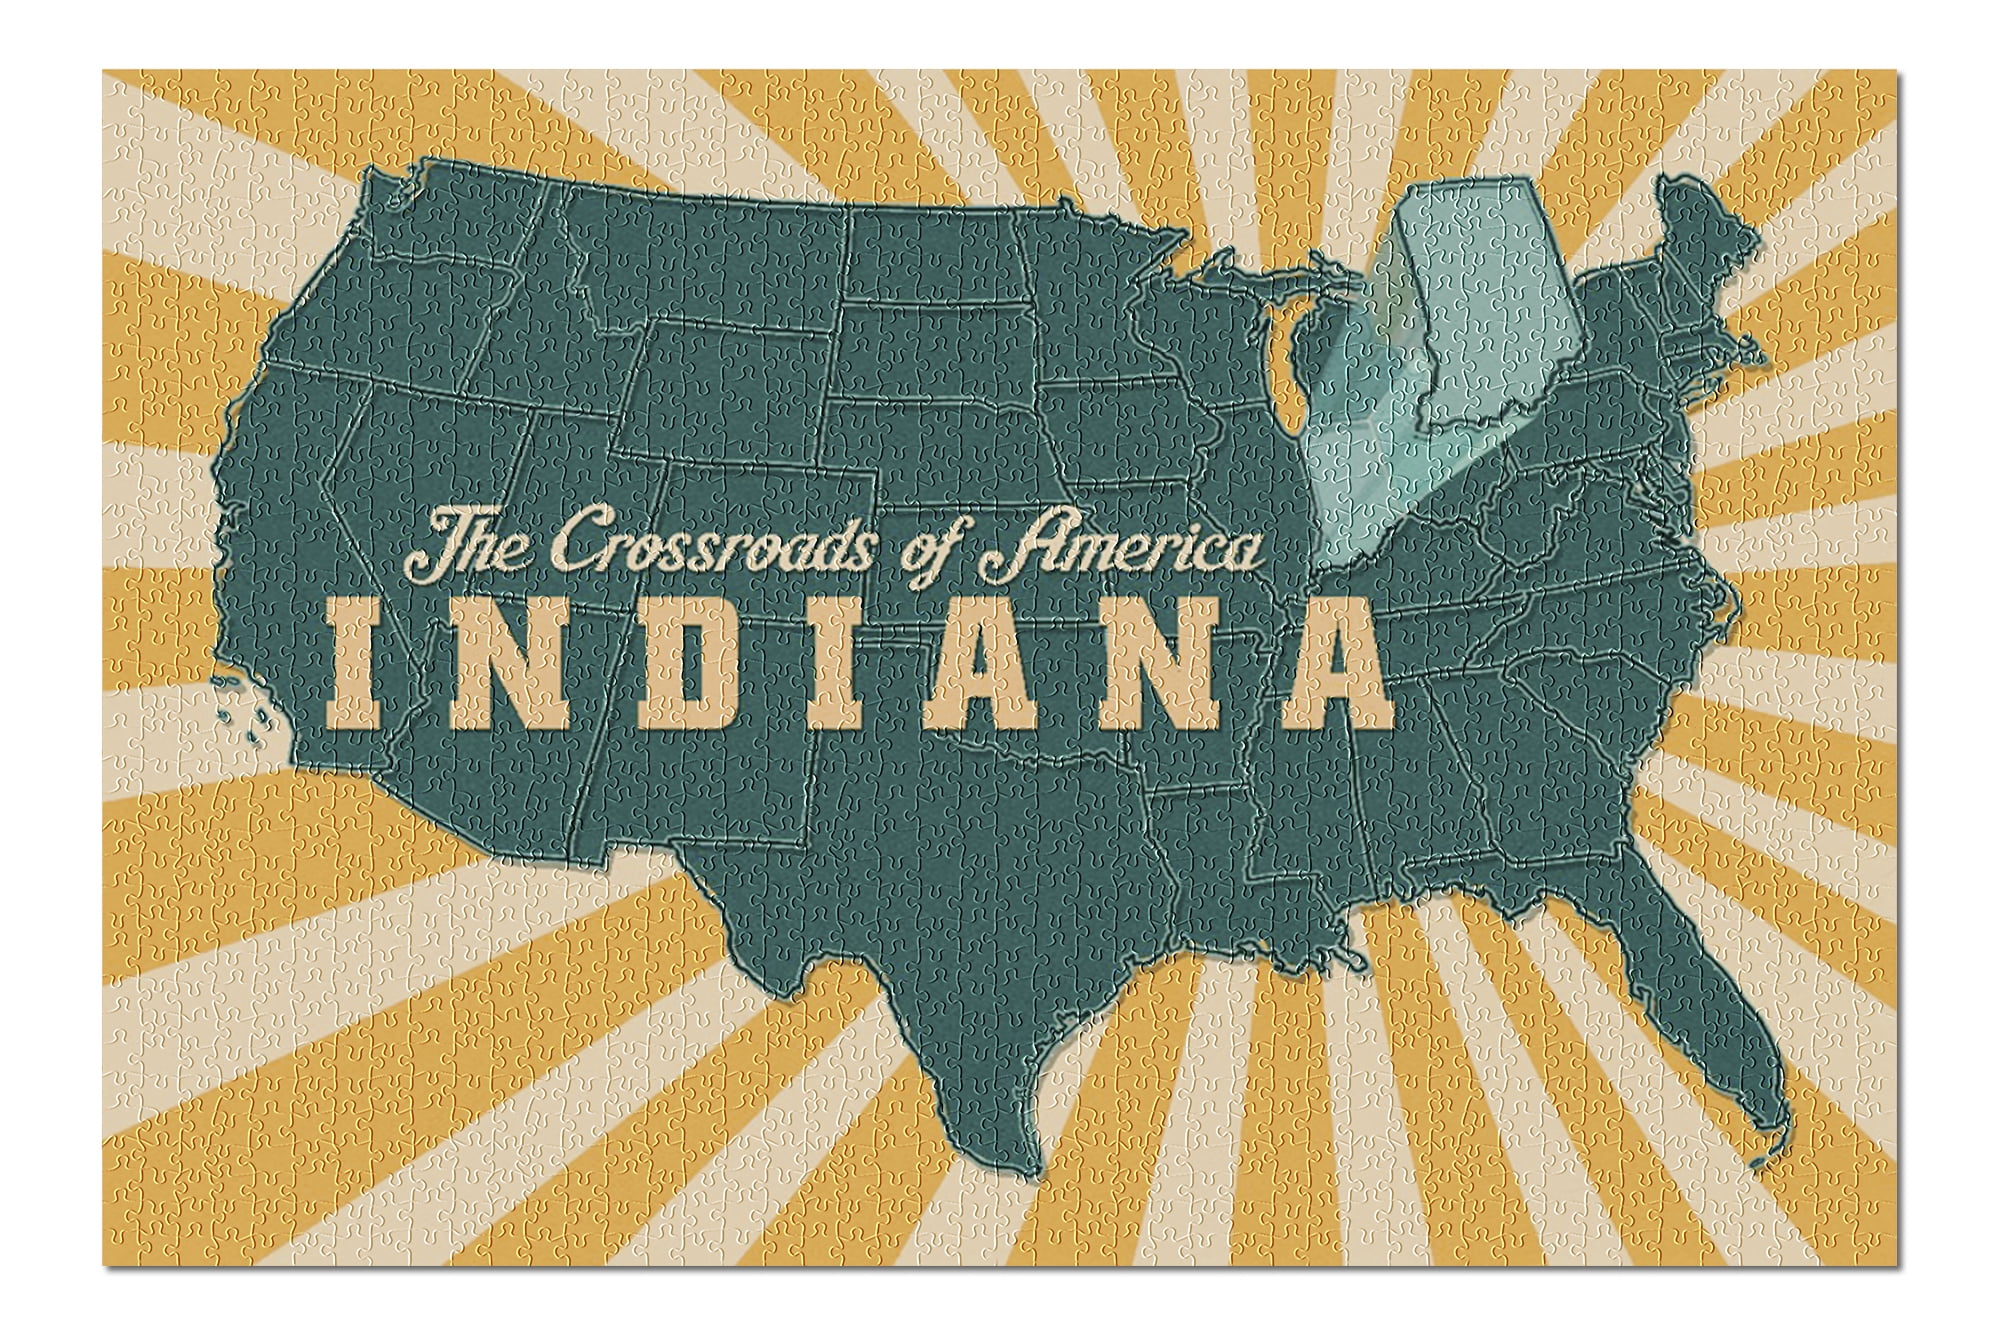 Indiana - The Crossroads of America Map - Pop Out State (20x30 Premium 1000 Piece Jigsaw Puzzle, Made in USA!)